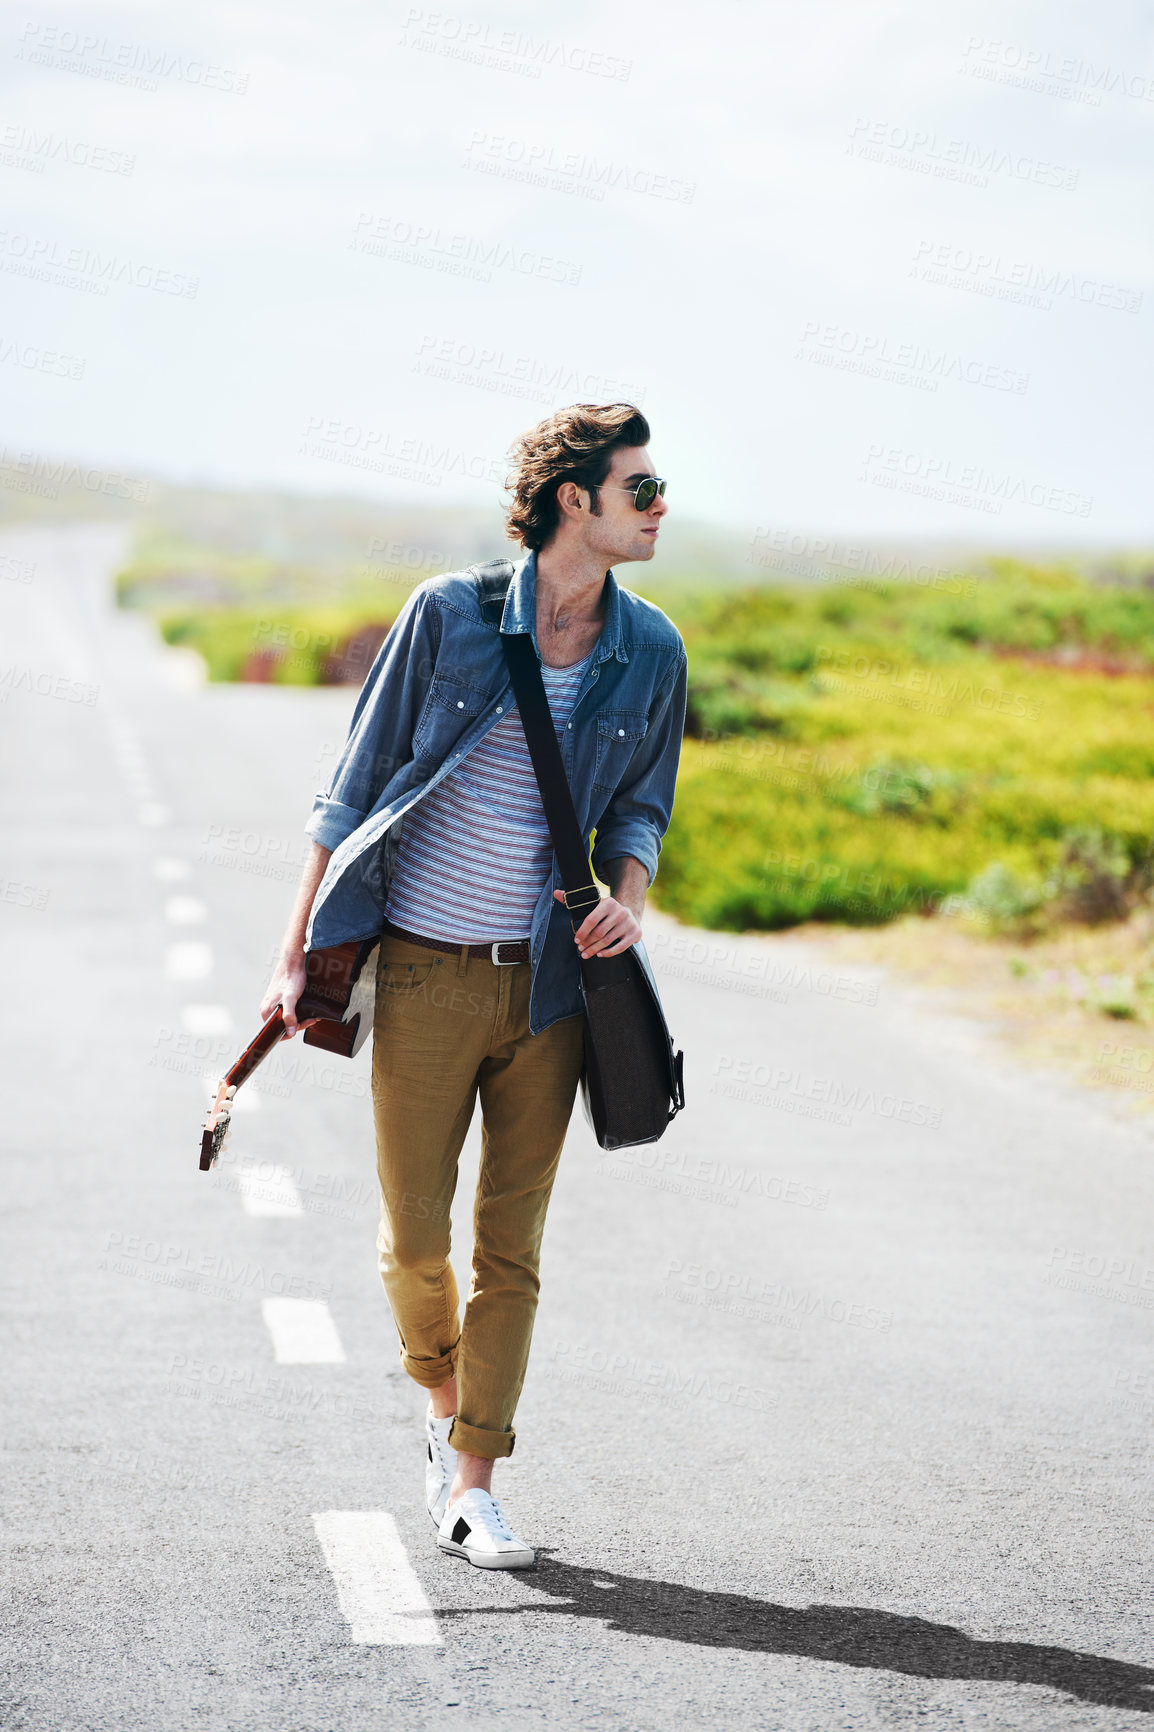 Buy stock photo Musician, walking and man with a guitar on a road trip, highway or journey in countryside. Guitarist, trekking or lost on adventure and explore path in landscape with freedom on holiday or vacation